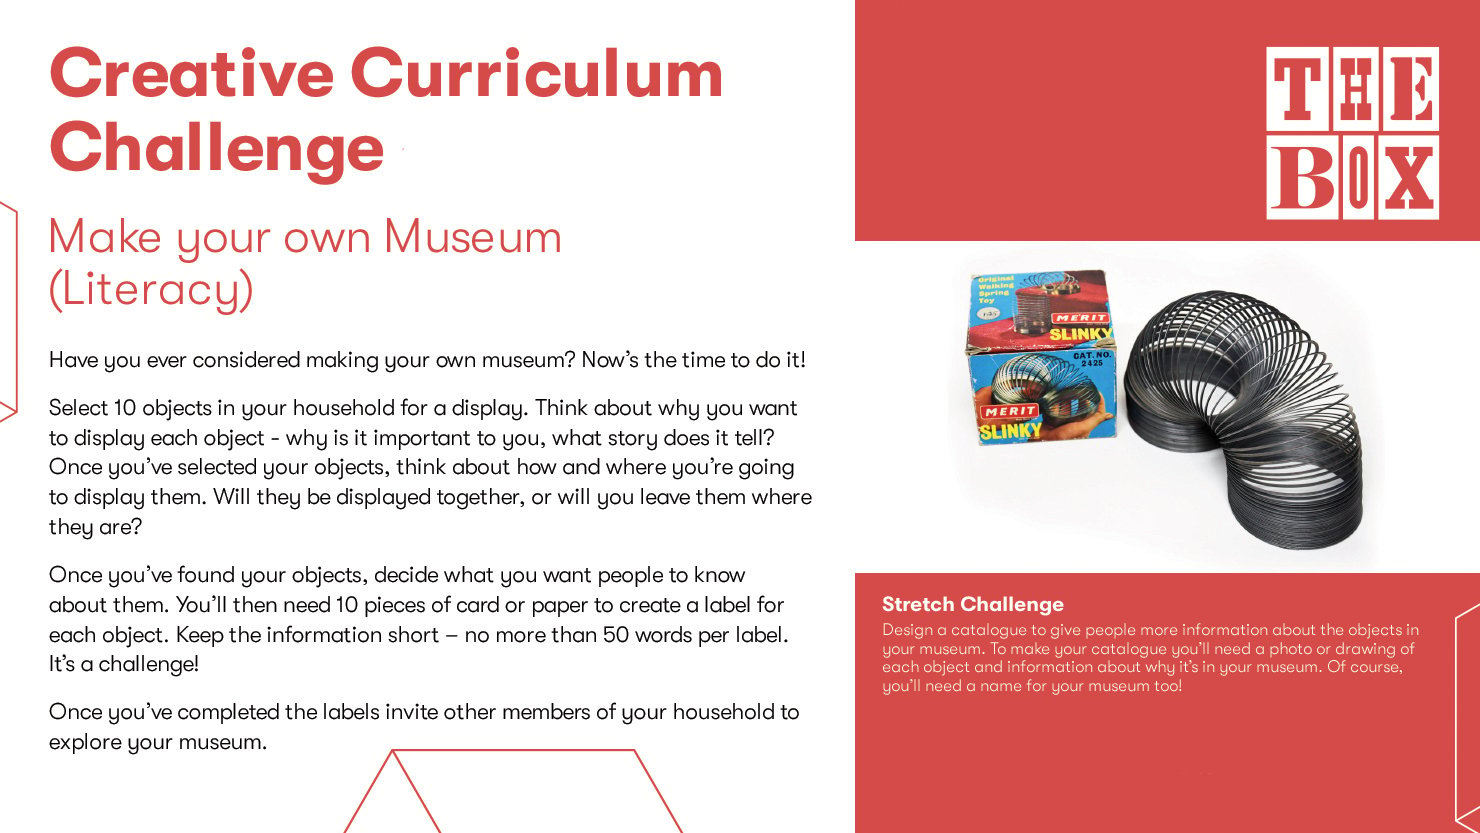 Graphic for The Box's literacy curriculum challenge